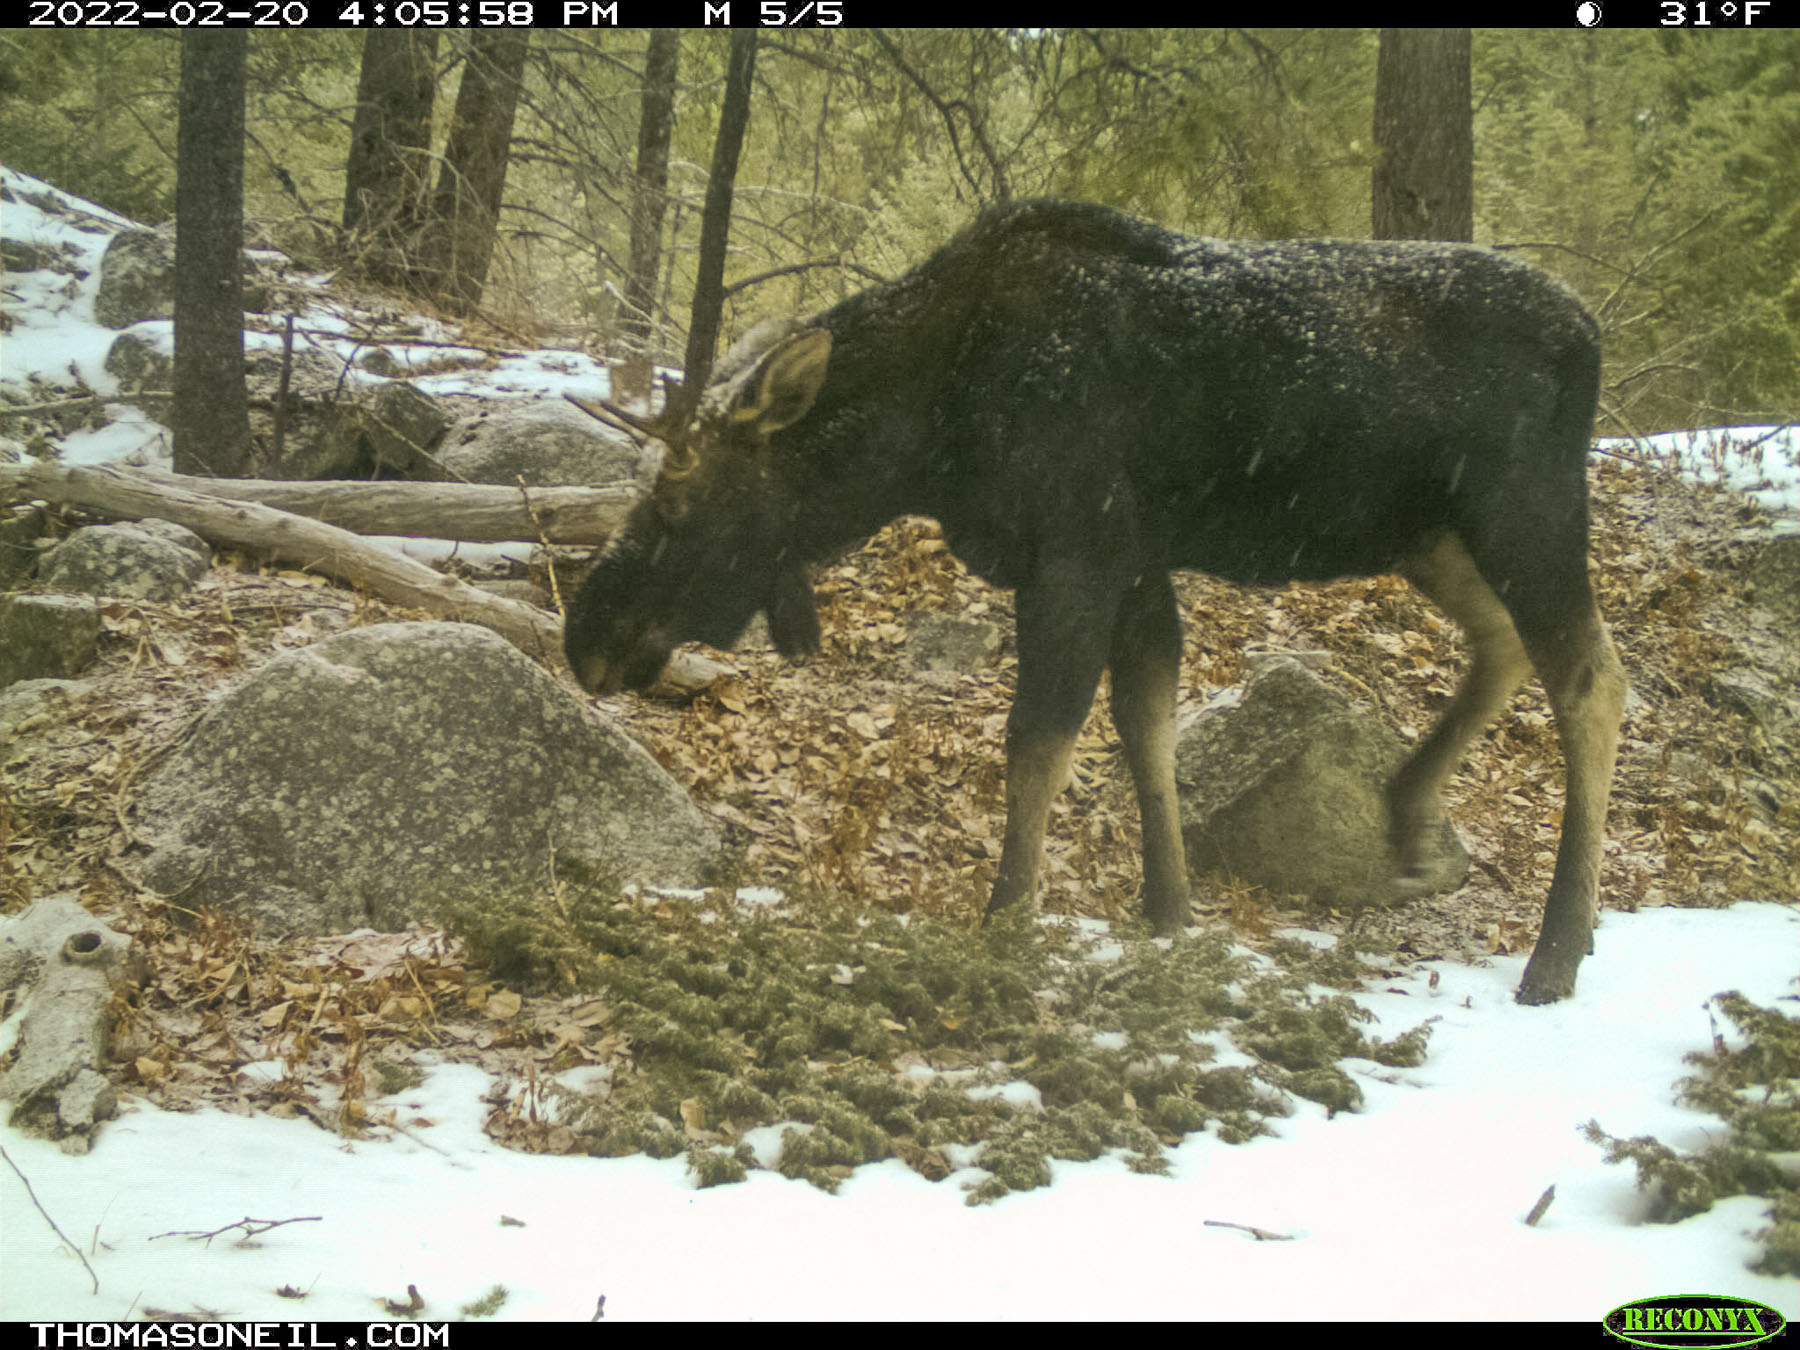 Moose on trailcam, Red Lodge, MT, February 2022.  Click for next photo.